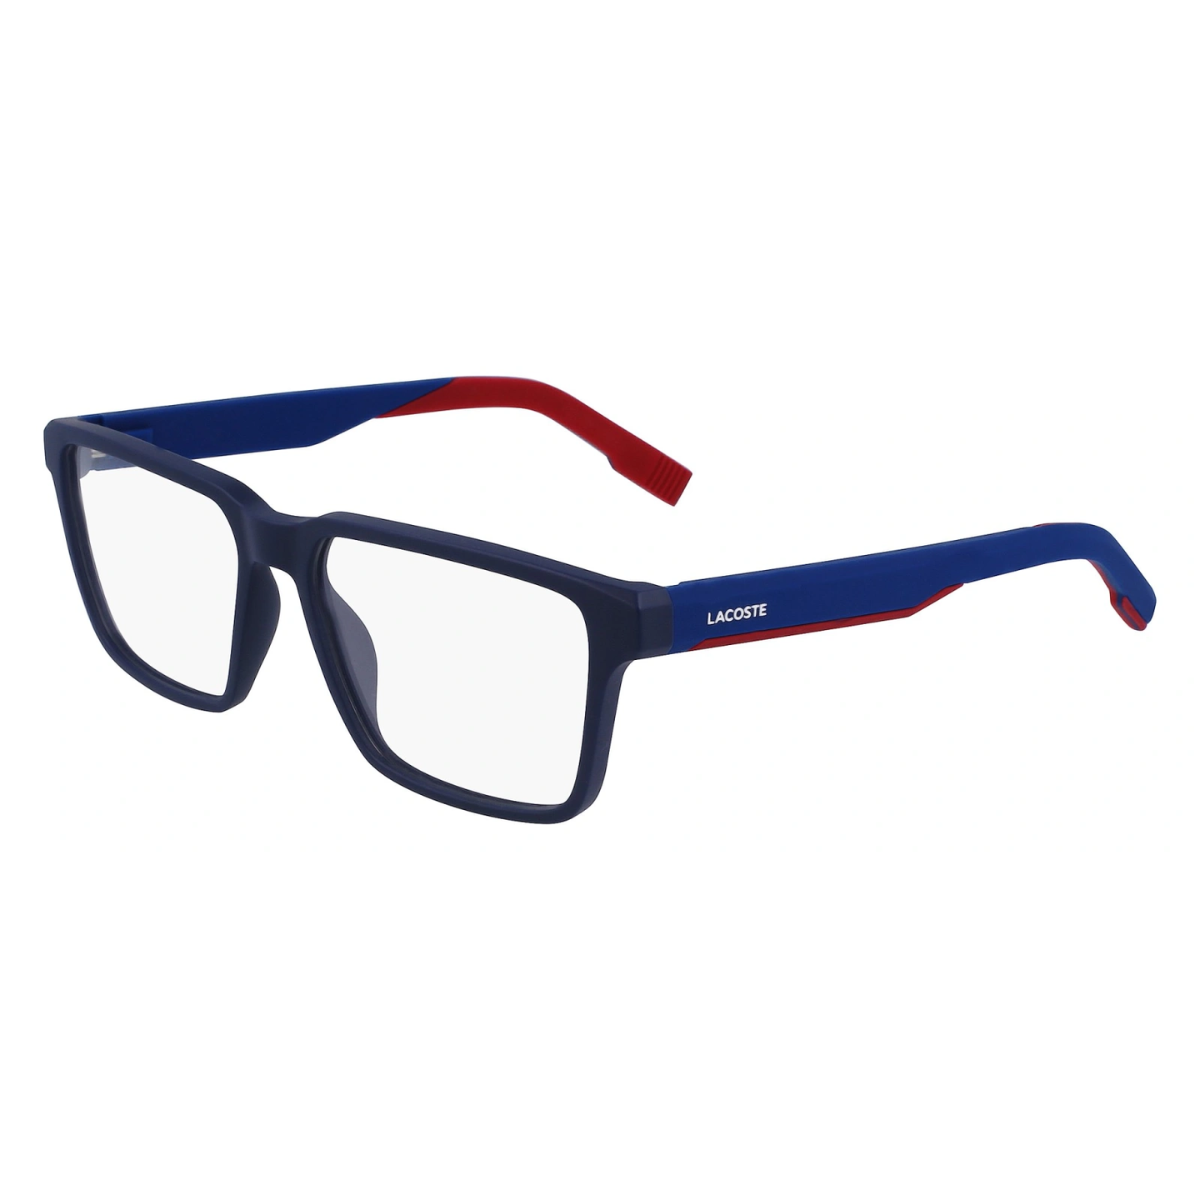 Lacoste 2924 Frame